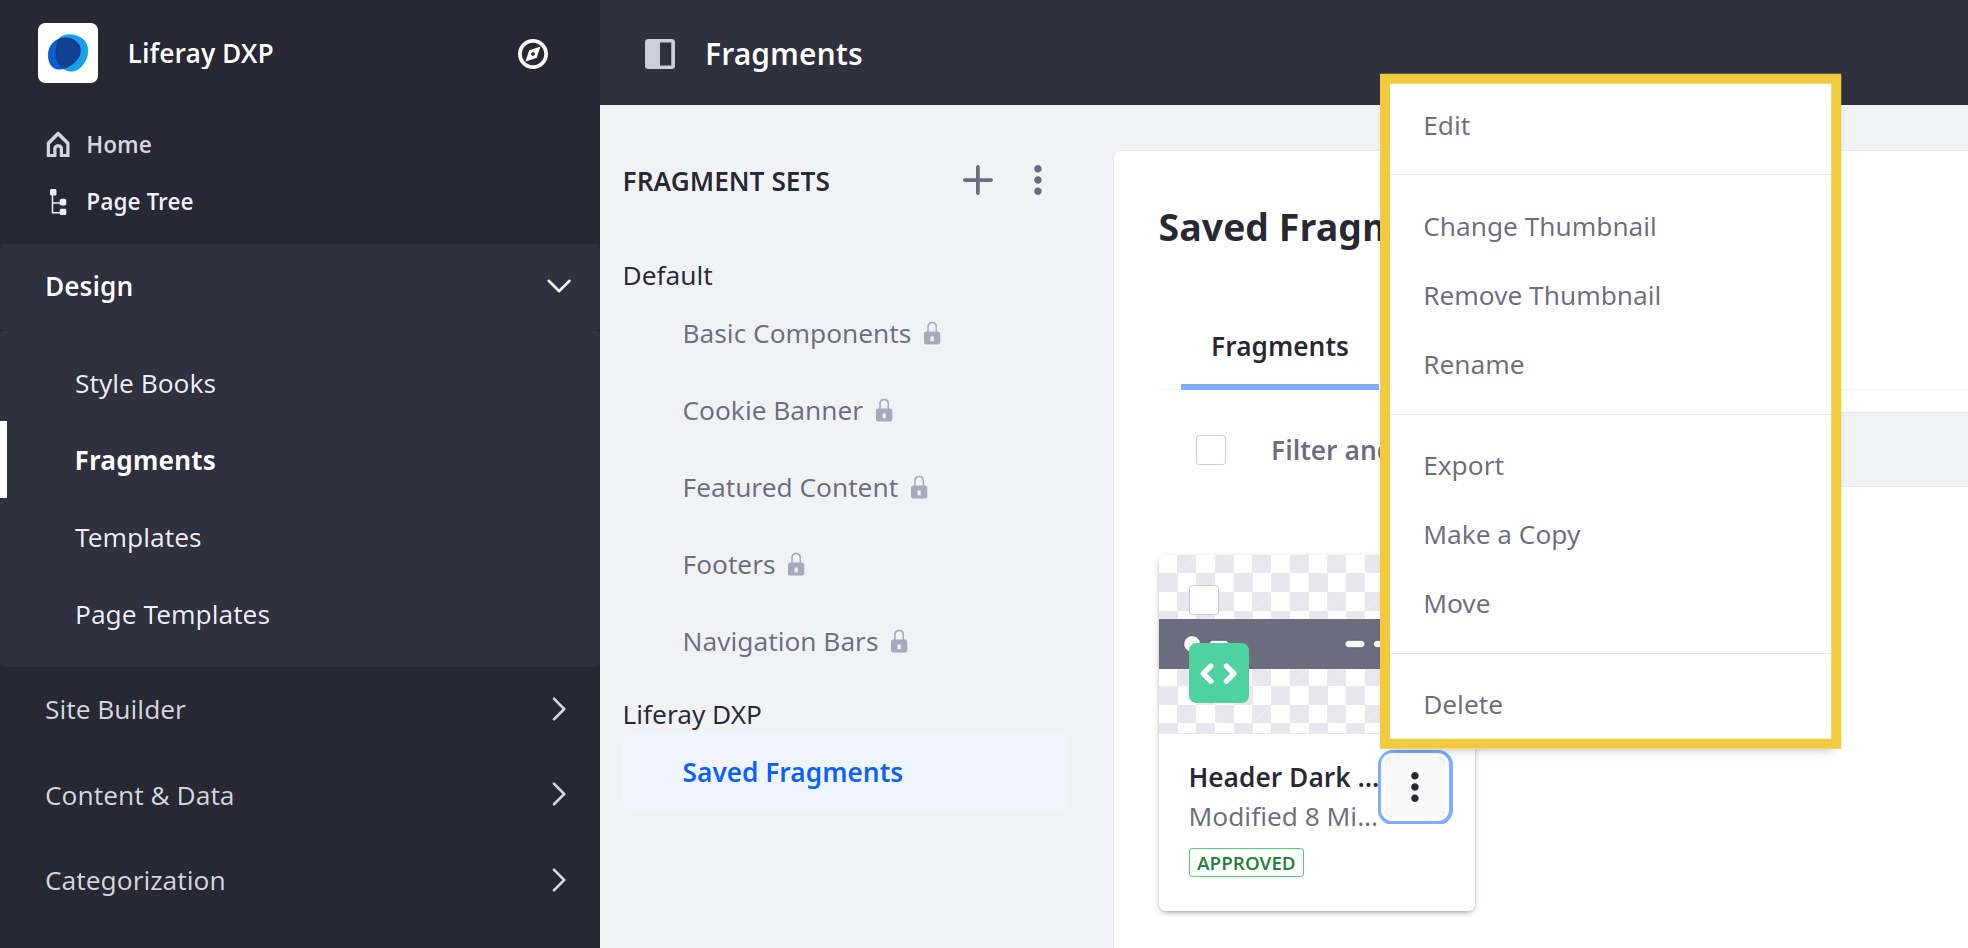 Click the fragment's Actions button to access fragment management options.